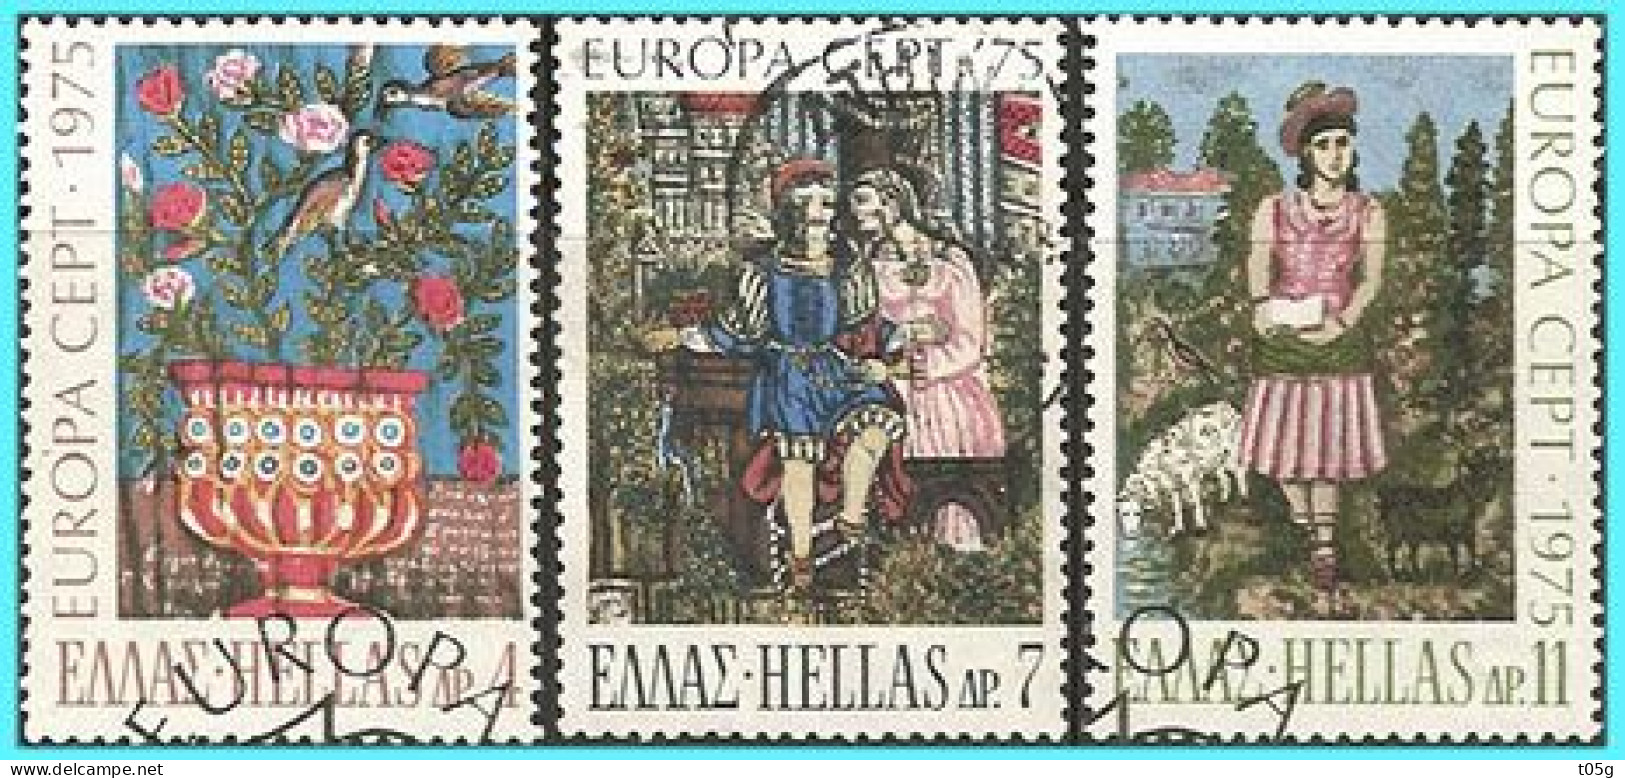 GREECE- GRECE  - HELLAS 1975: EUROPA  CERT Compl. Set Used - Used Stamps